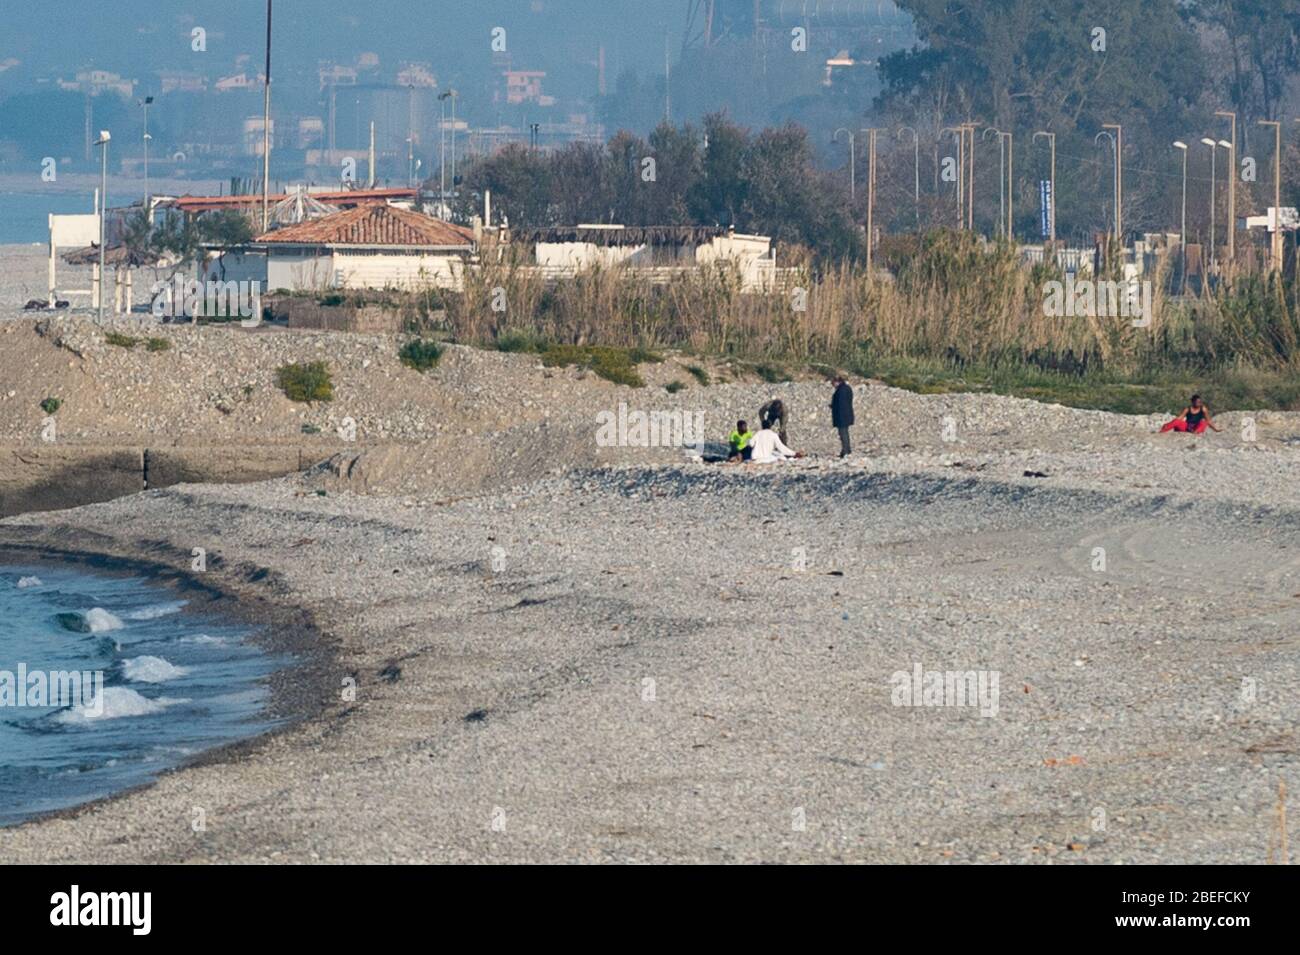 Corigliano-Rossano, Italy. 13th Apr, 2020. Corigliano-Rossano, a 20-year-old Senegalese dies drowned in the sea a few meters from the beach in Corigliano-Rossano, despite the carpet checks for the restrictions imposed by the Government for the control of the infection by Coronavirus (COVID-19). 13/04/2020, Corigliano-Rossano, Italy Credit: Independent Photo Agency Srl/Alamy Live News Stock Photo